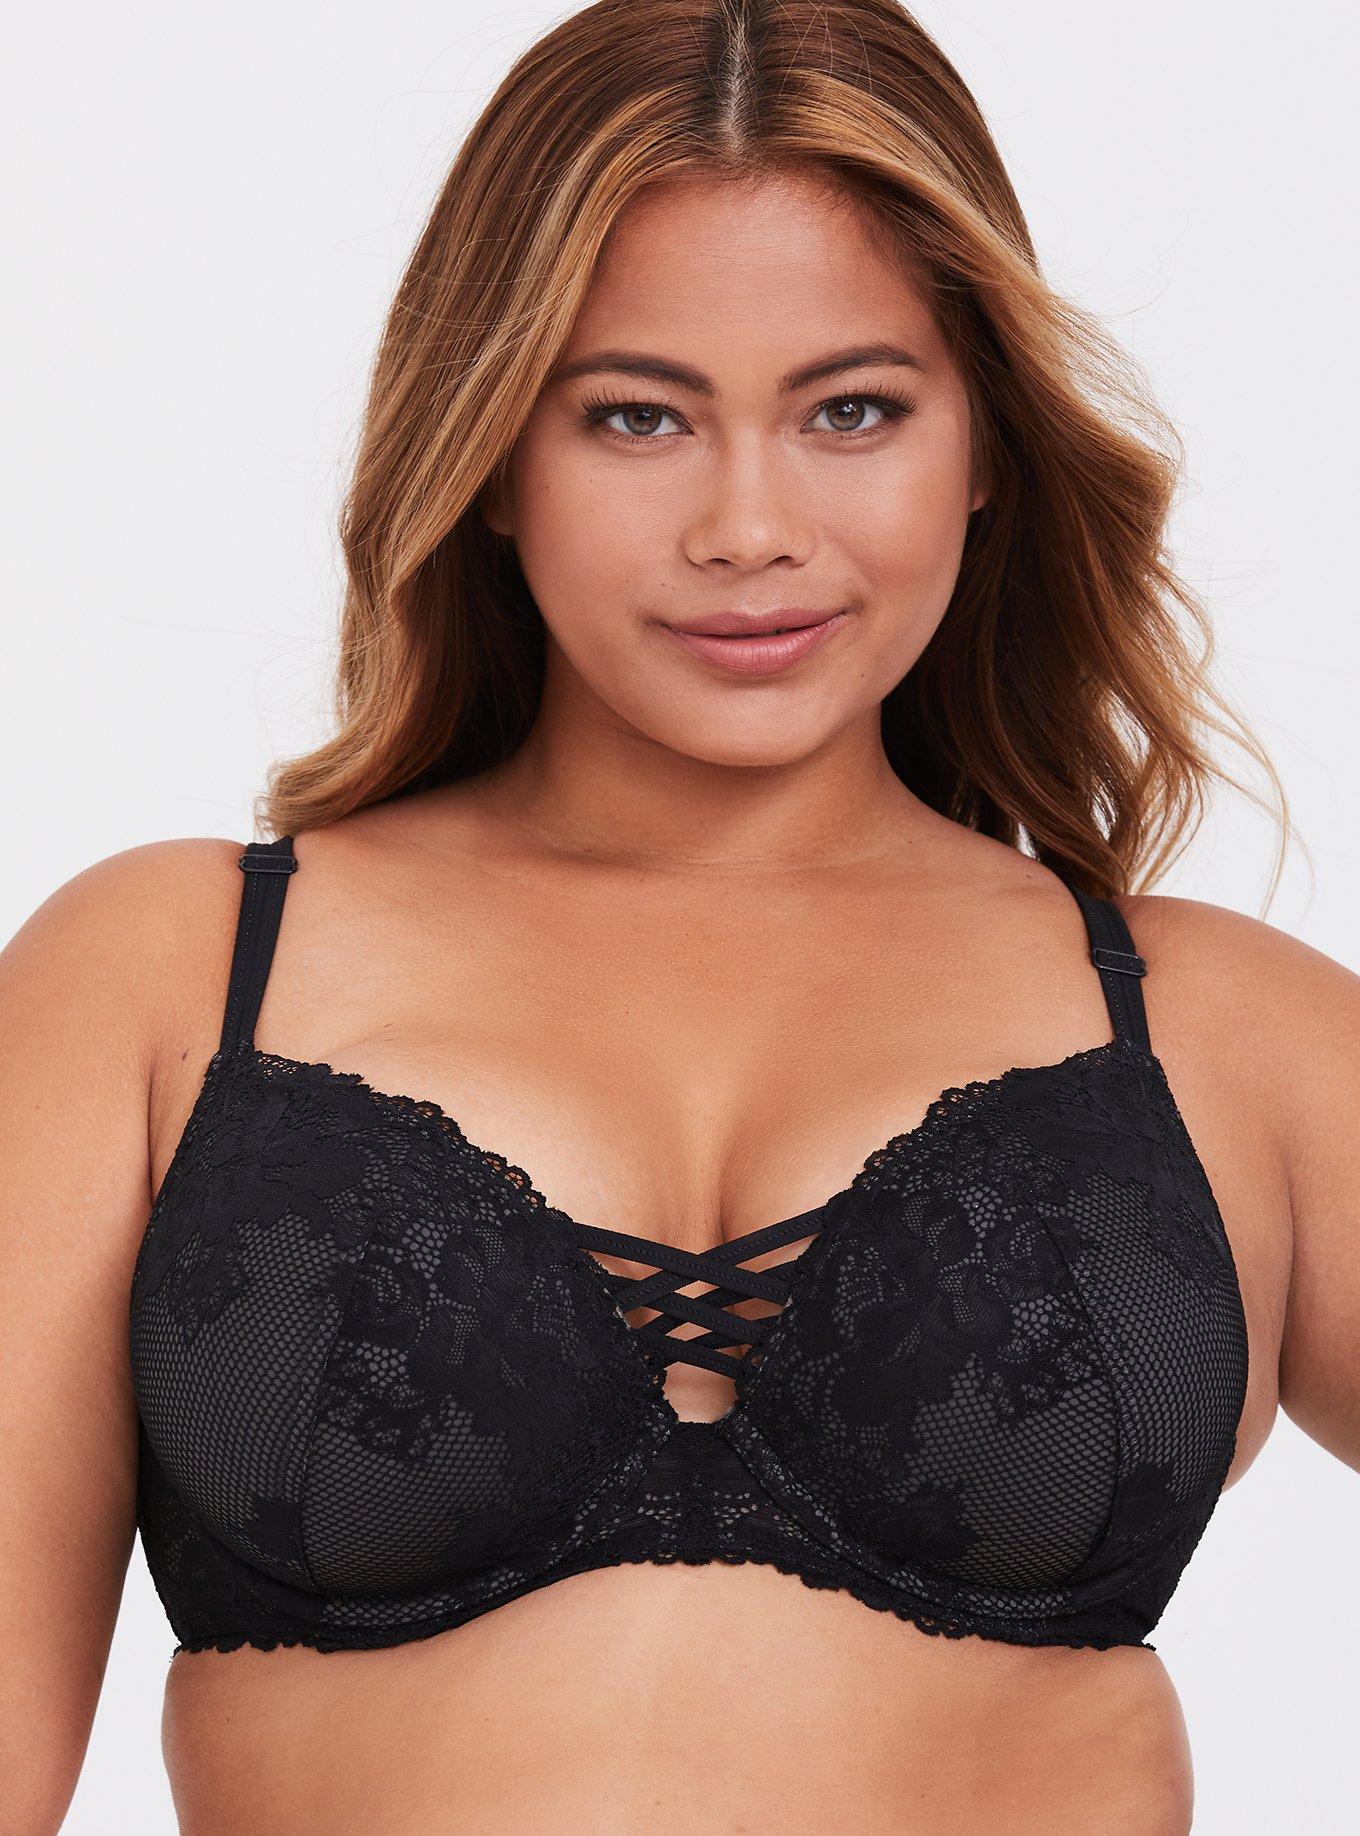 Plus Size Padded Push Up Lace Deep V Low Plunge Bra With Strong Resistance  Hot Selling Low Plunge Brasiere In A, B, C, D, E, And Bone Sizes 32 44  201202 From